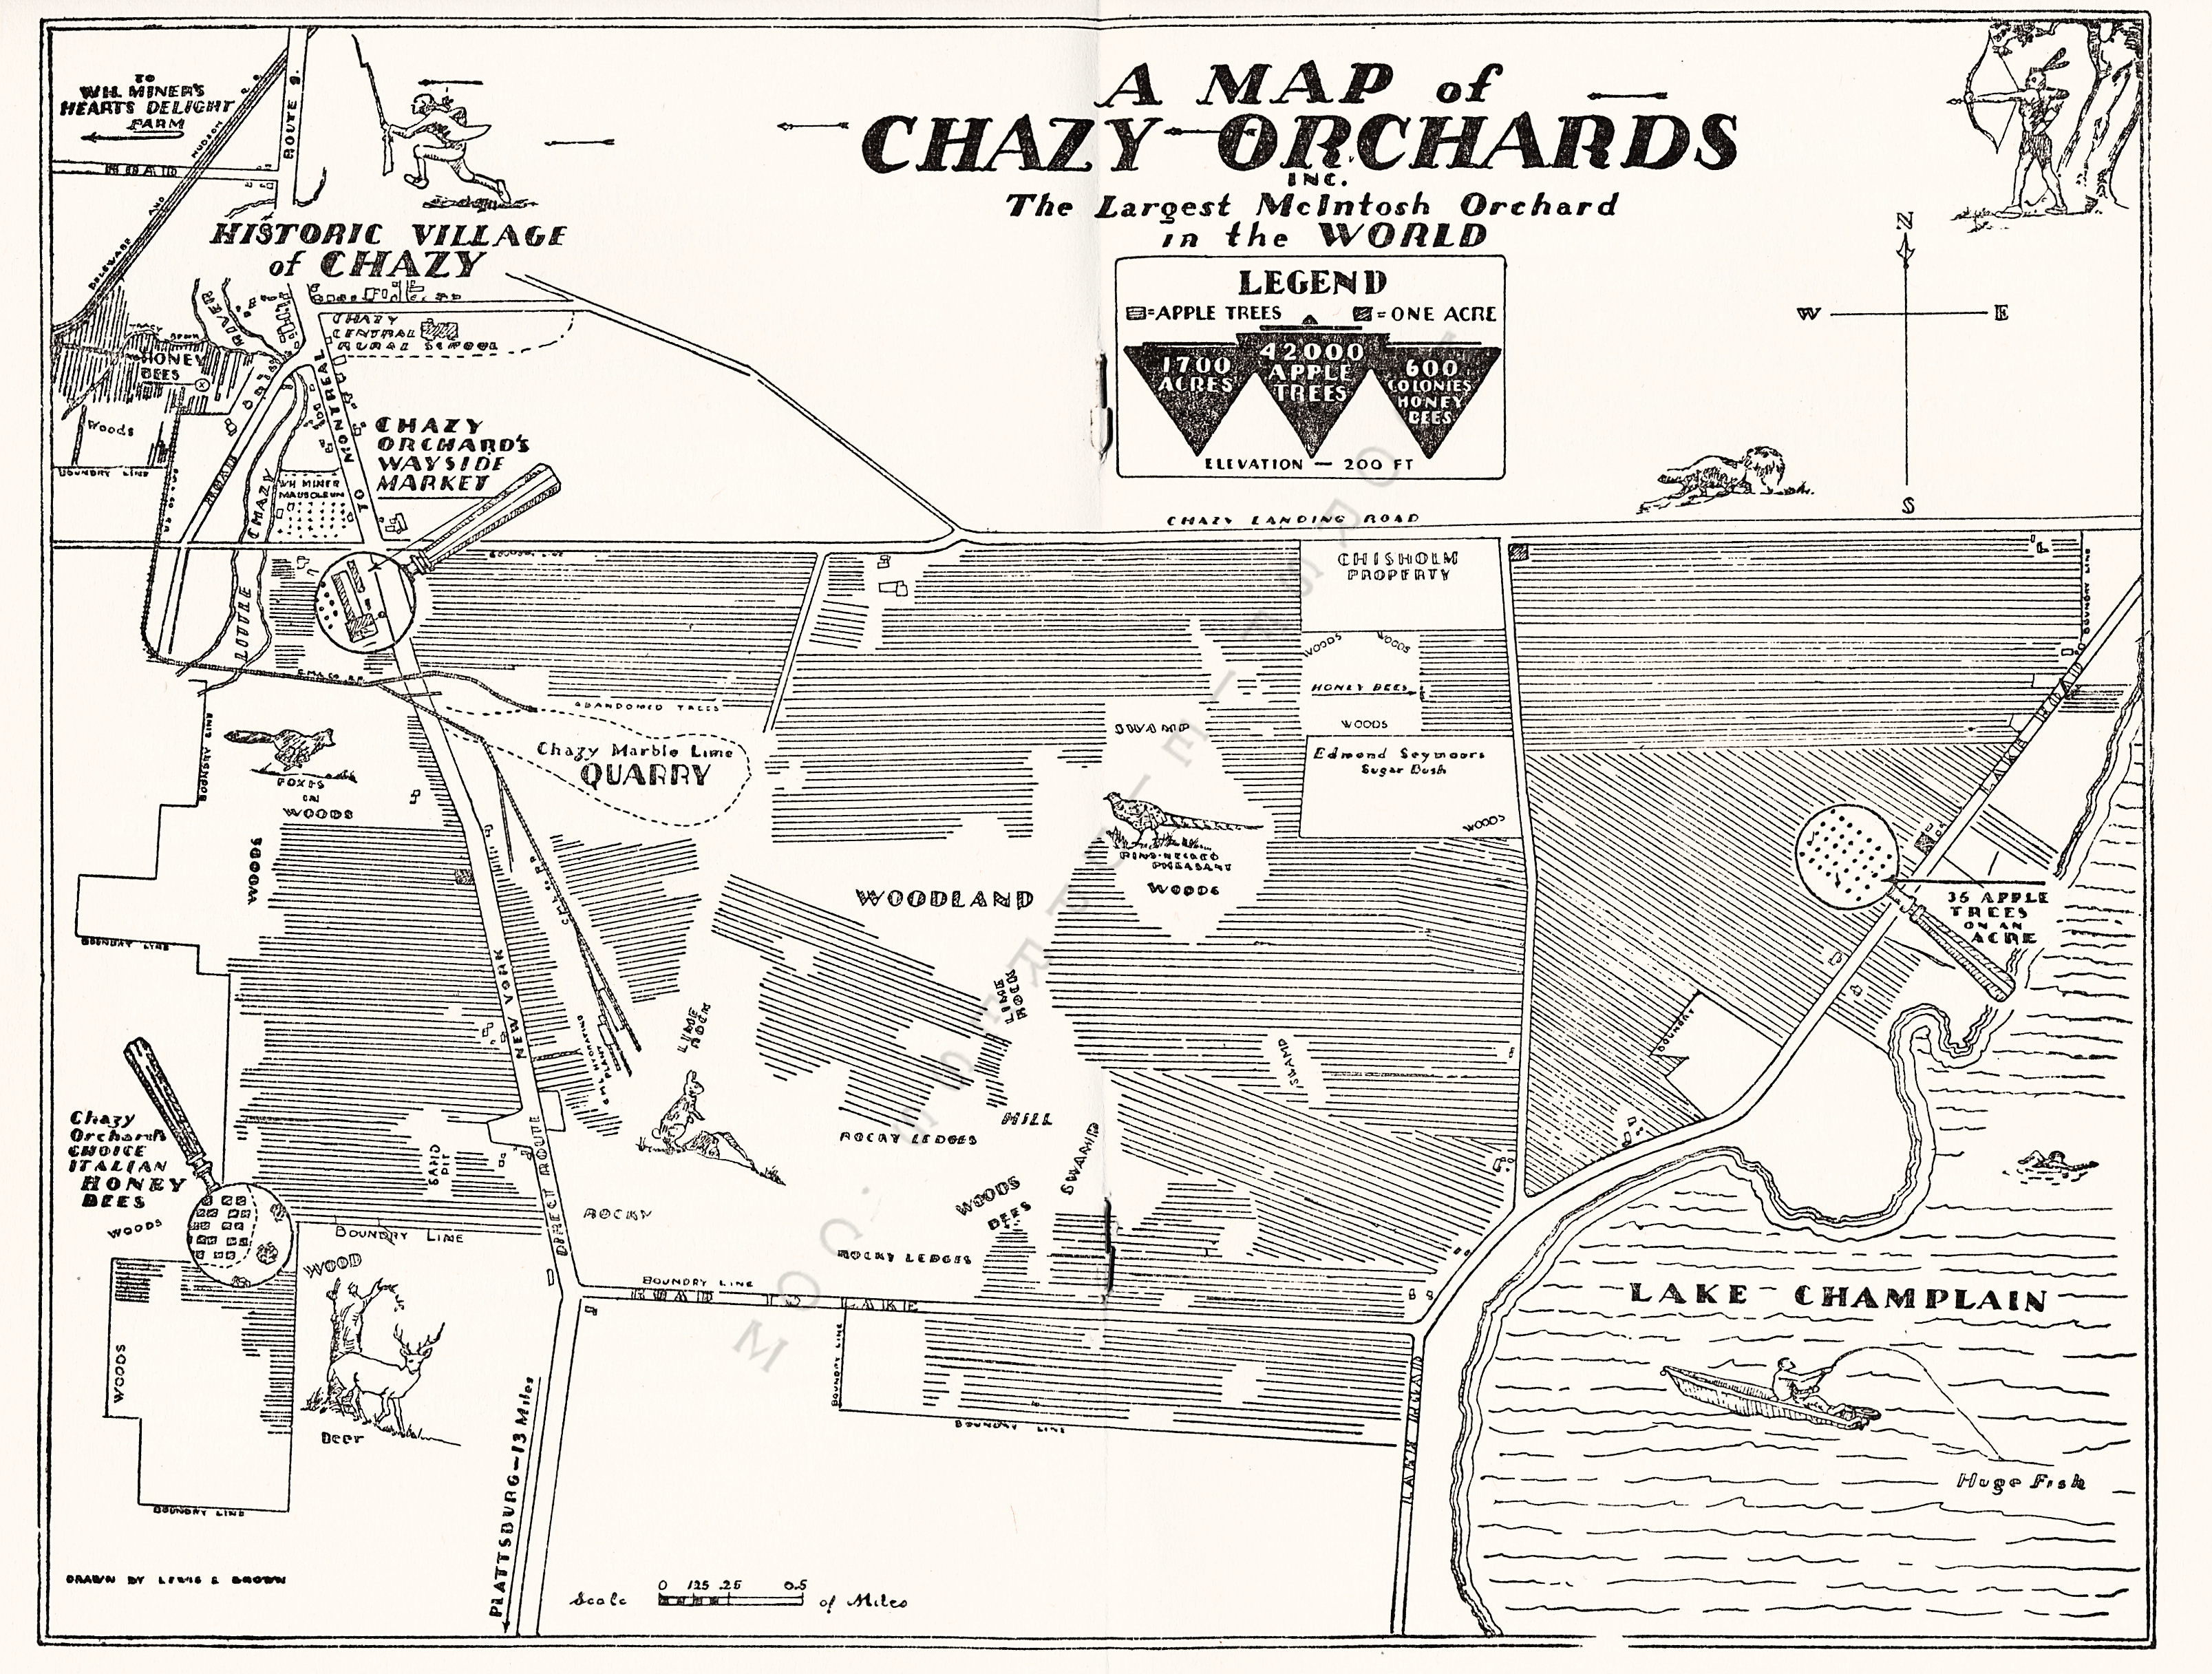 chazy orchards brochure 1957